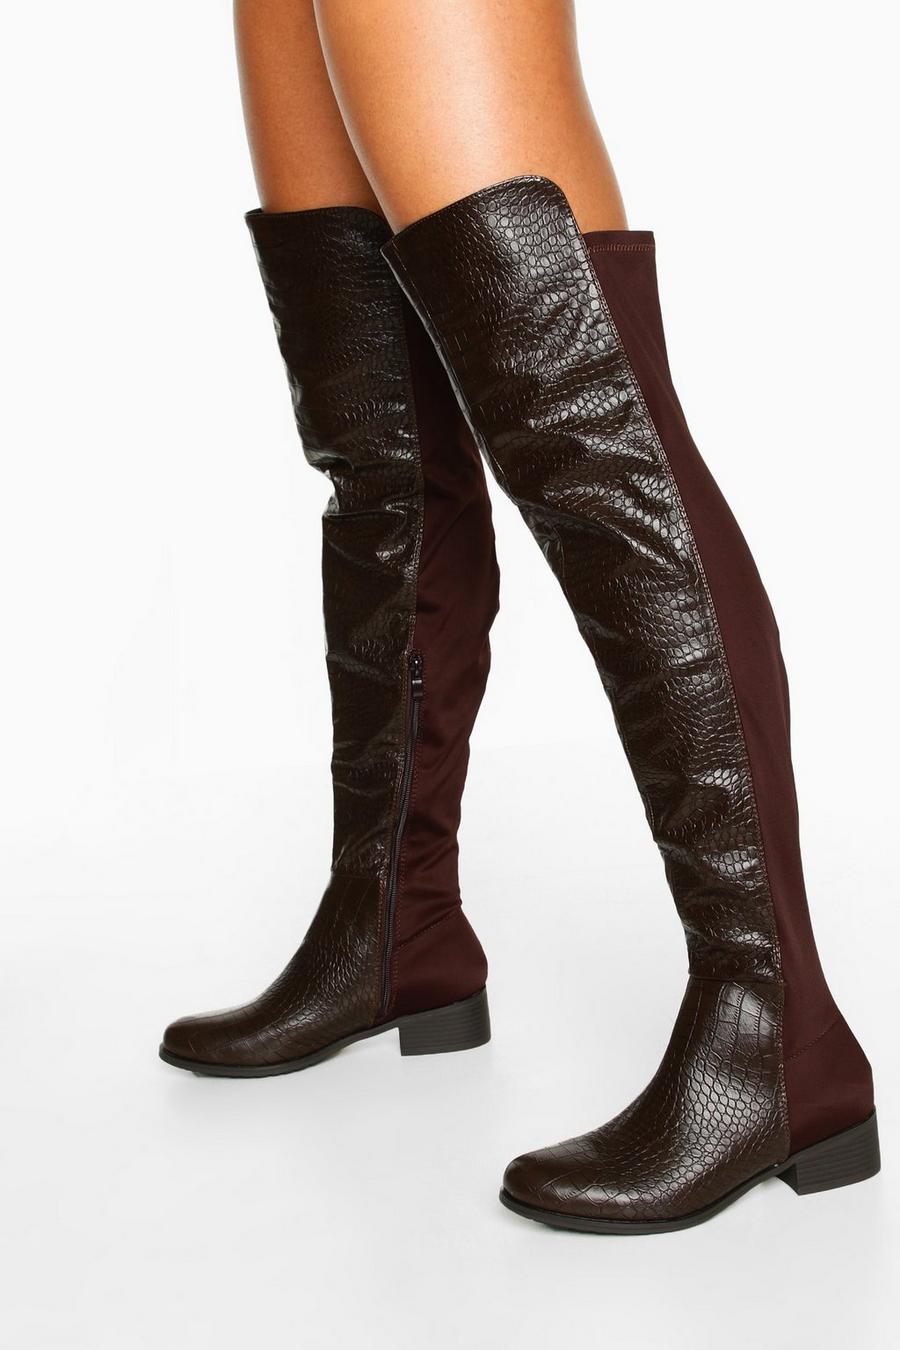 Chocolate Croc Over The Knee High Boots